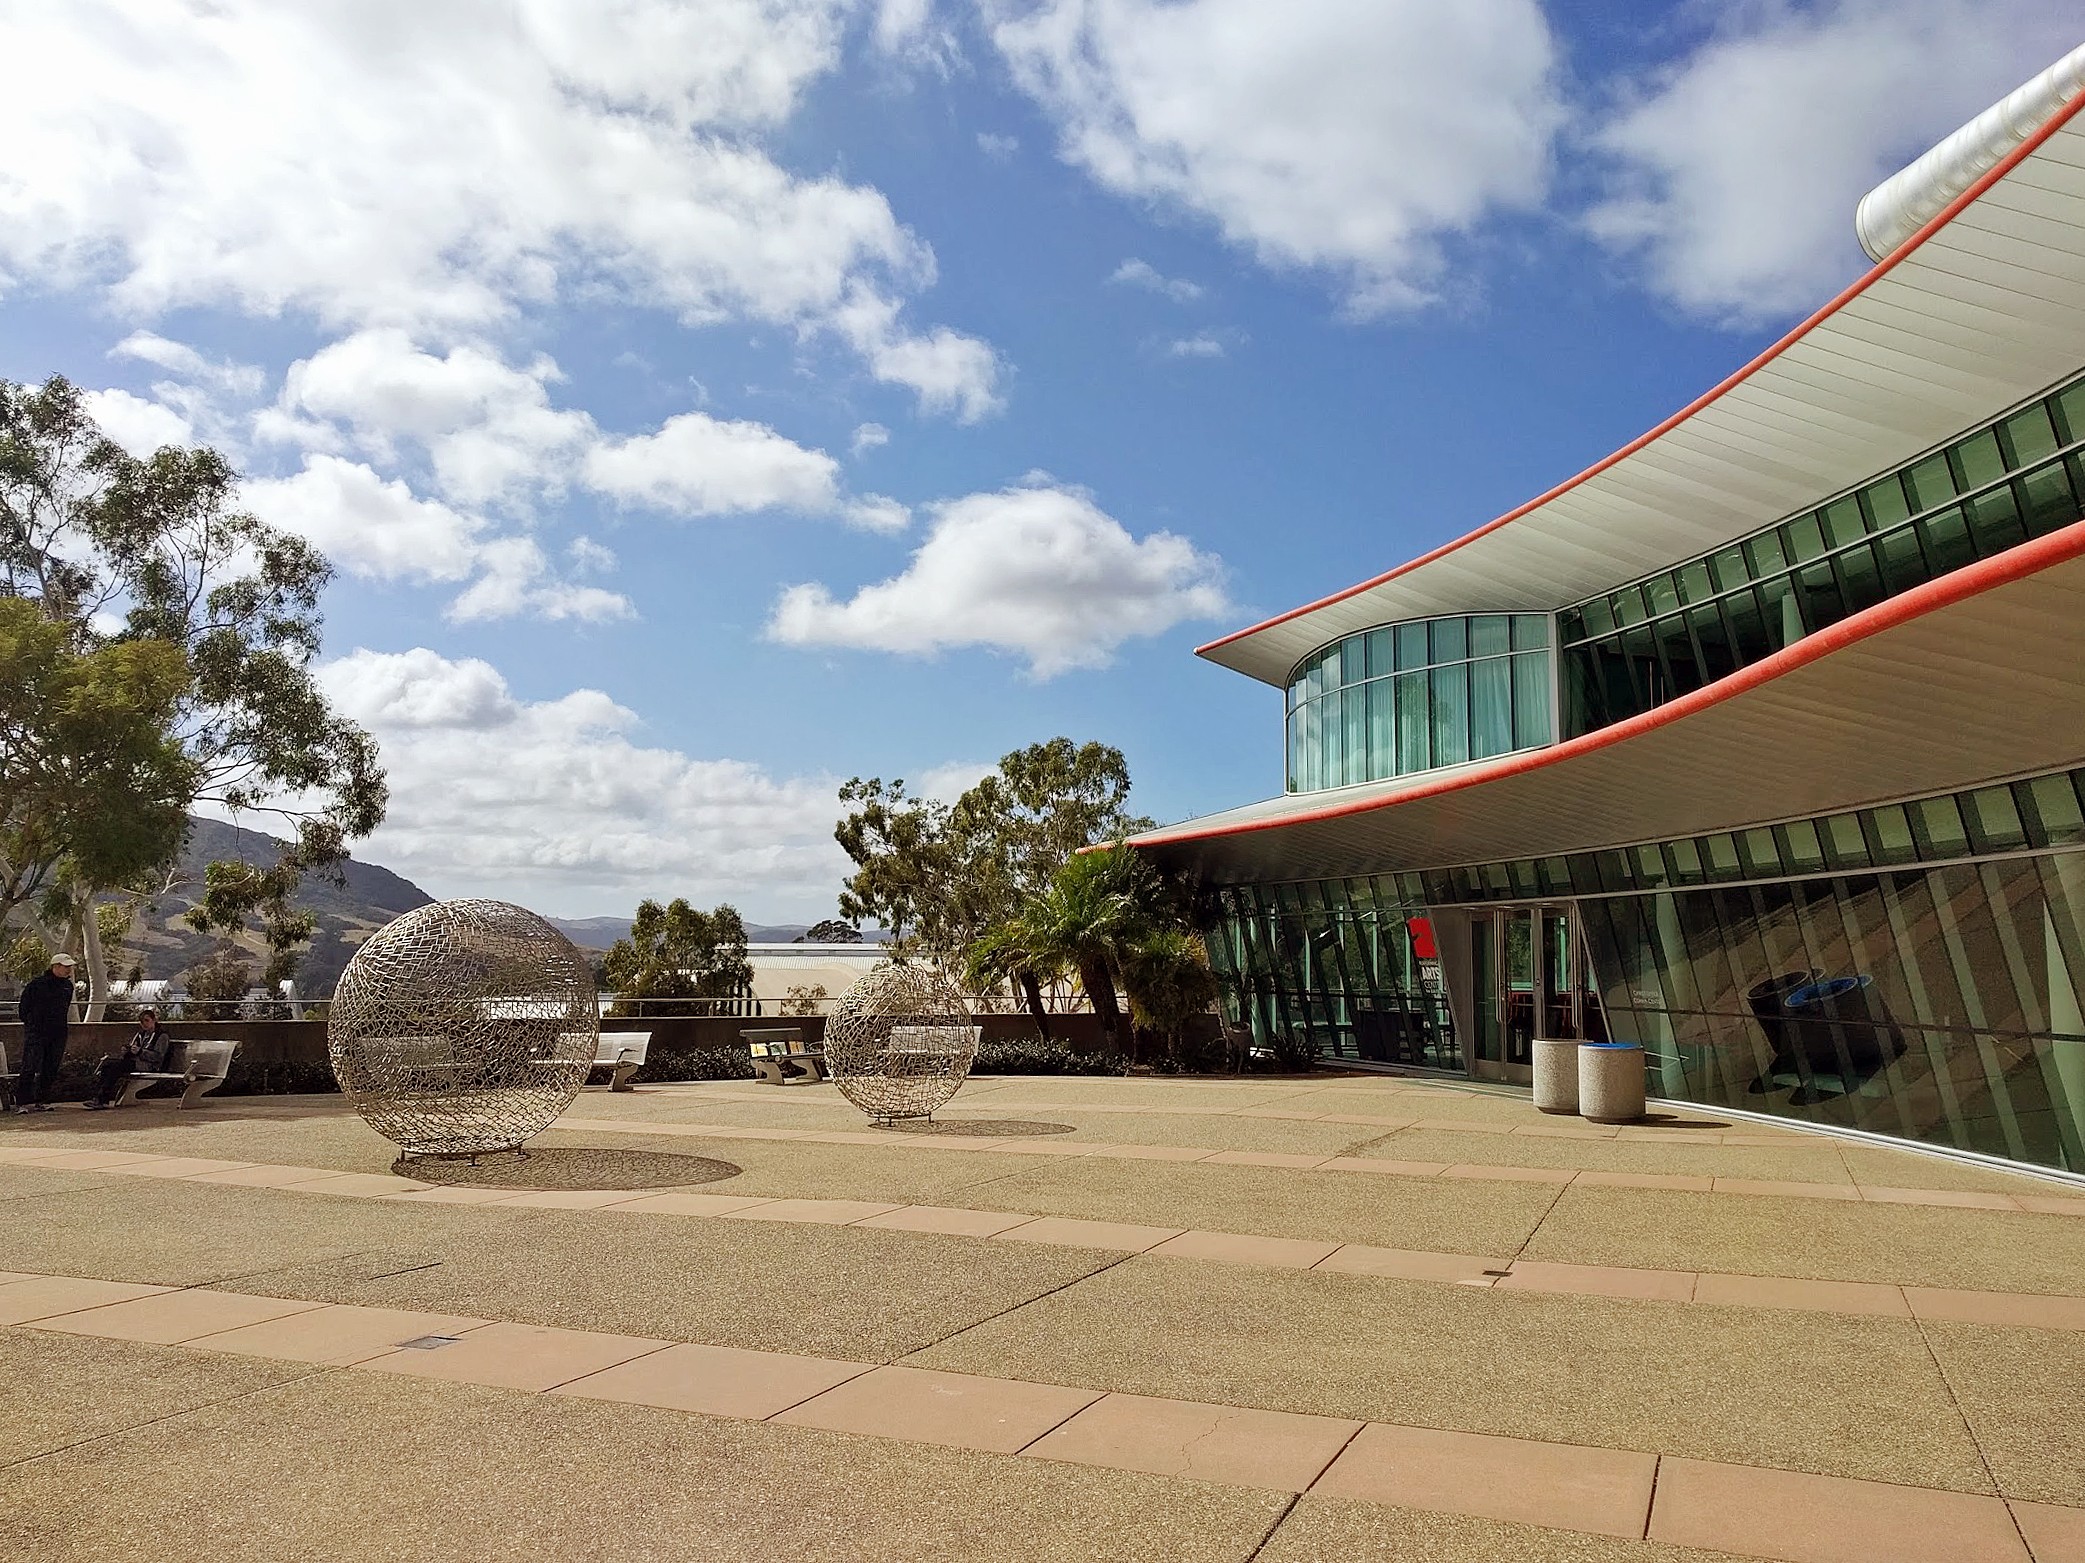 Cal Poly's Performing Arts Center plaza to receive renovations and